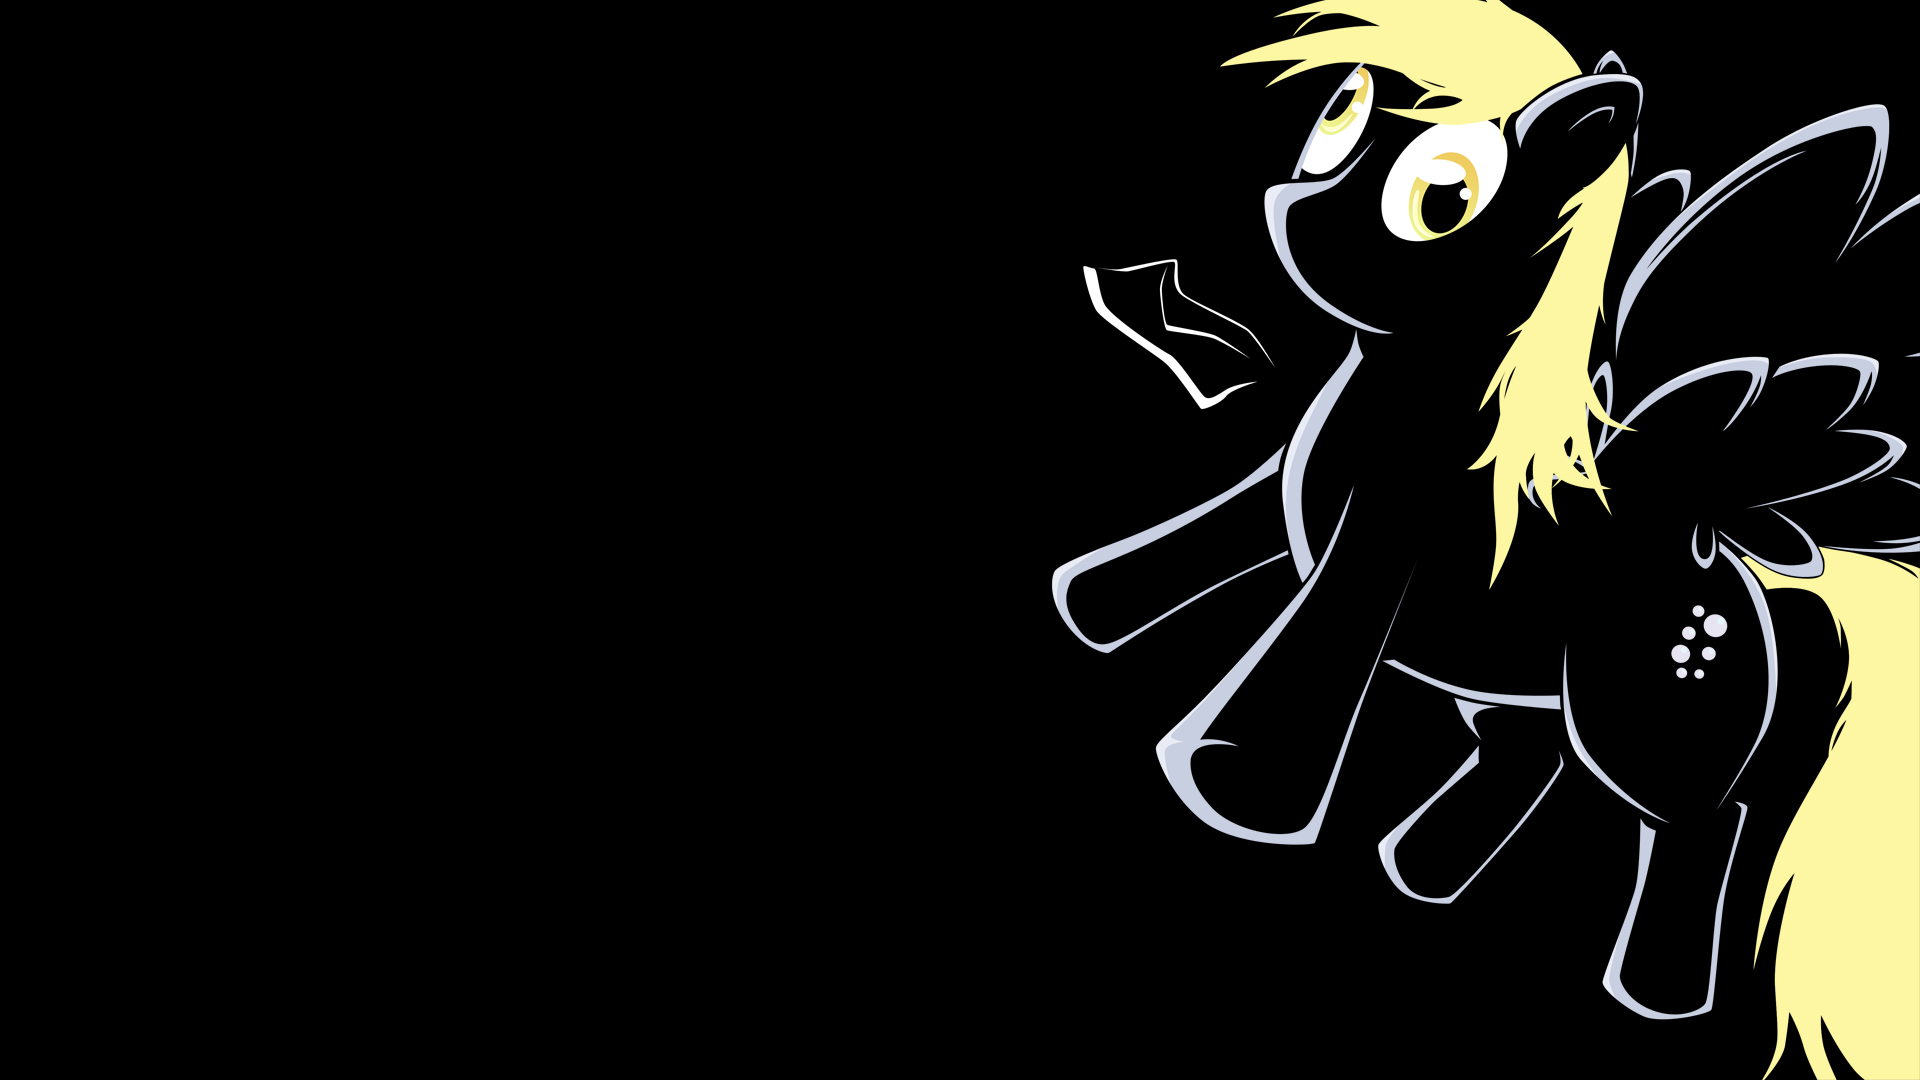 Derpy hooves background by Braukoly